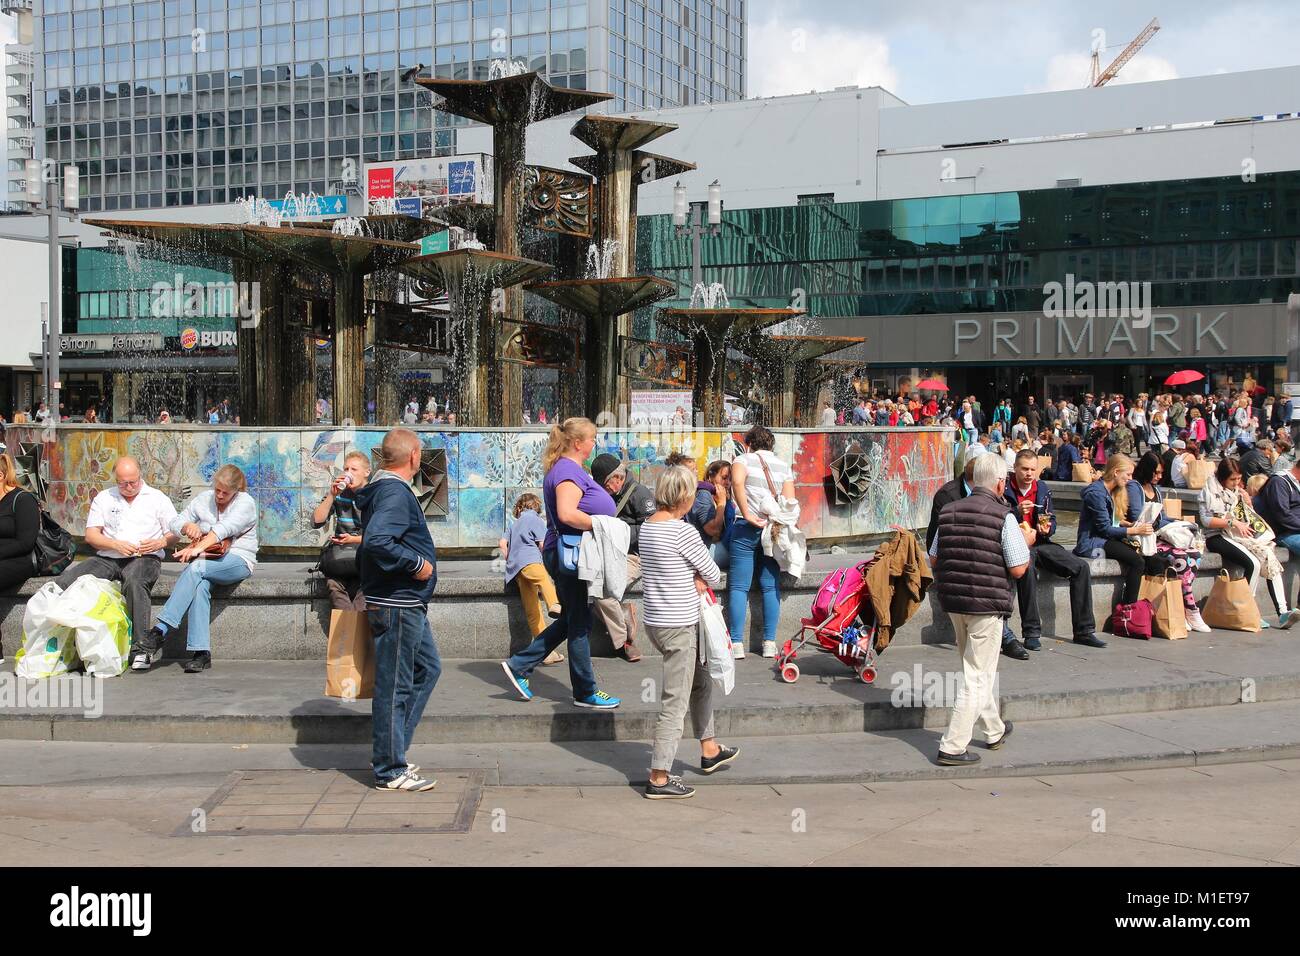 BERLIN, GERMANY - AUGUST 26, 2014: People visit famous Alexander Square (Alexanderplatz) in Berlin. Berlin is Germany's largest city with population o Stock Photo